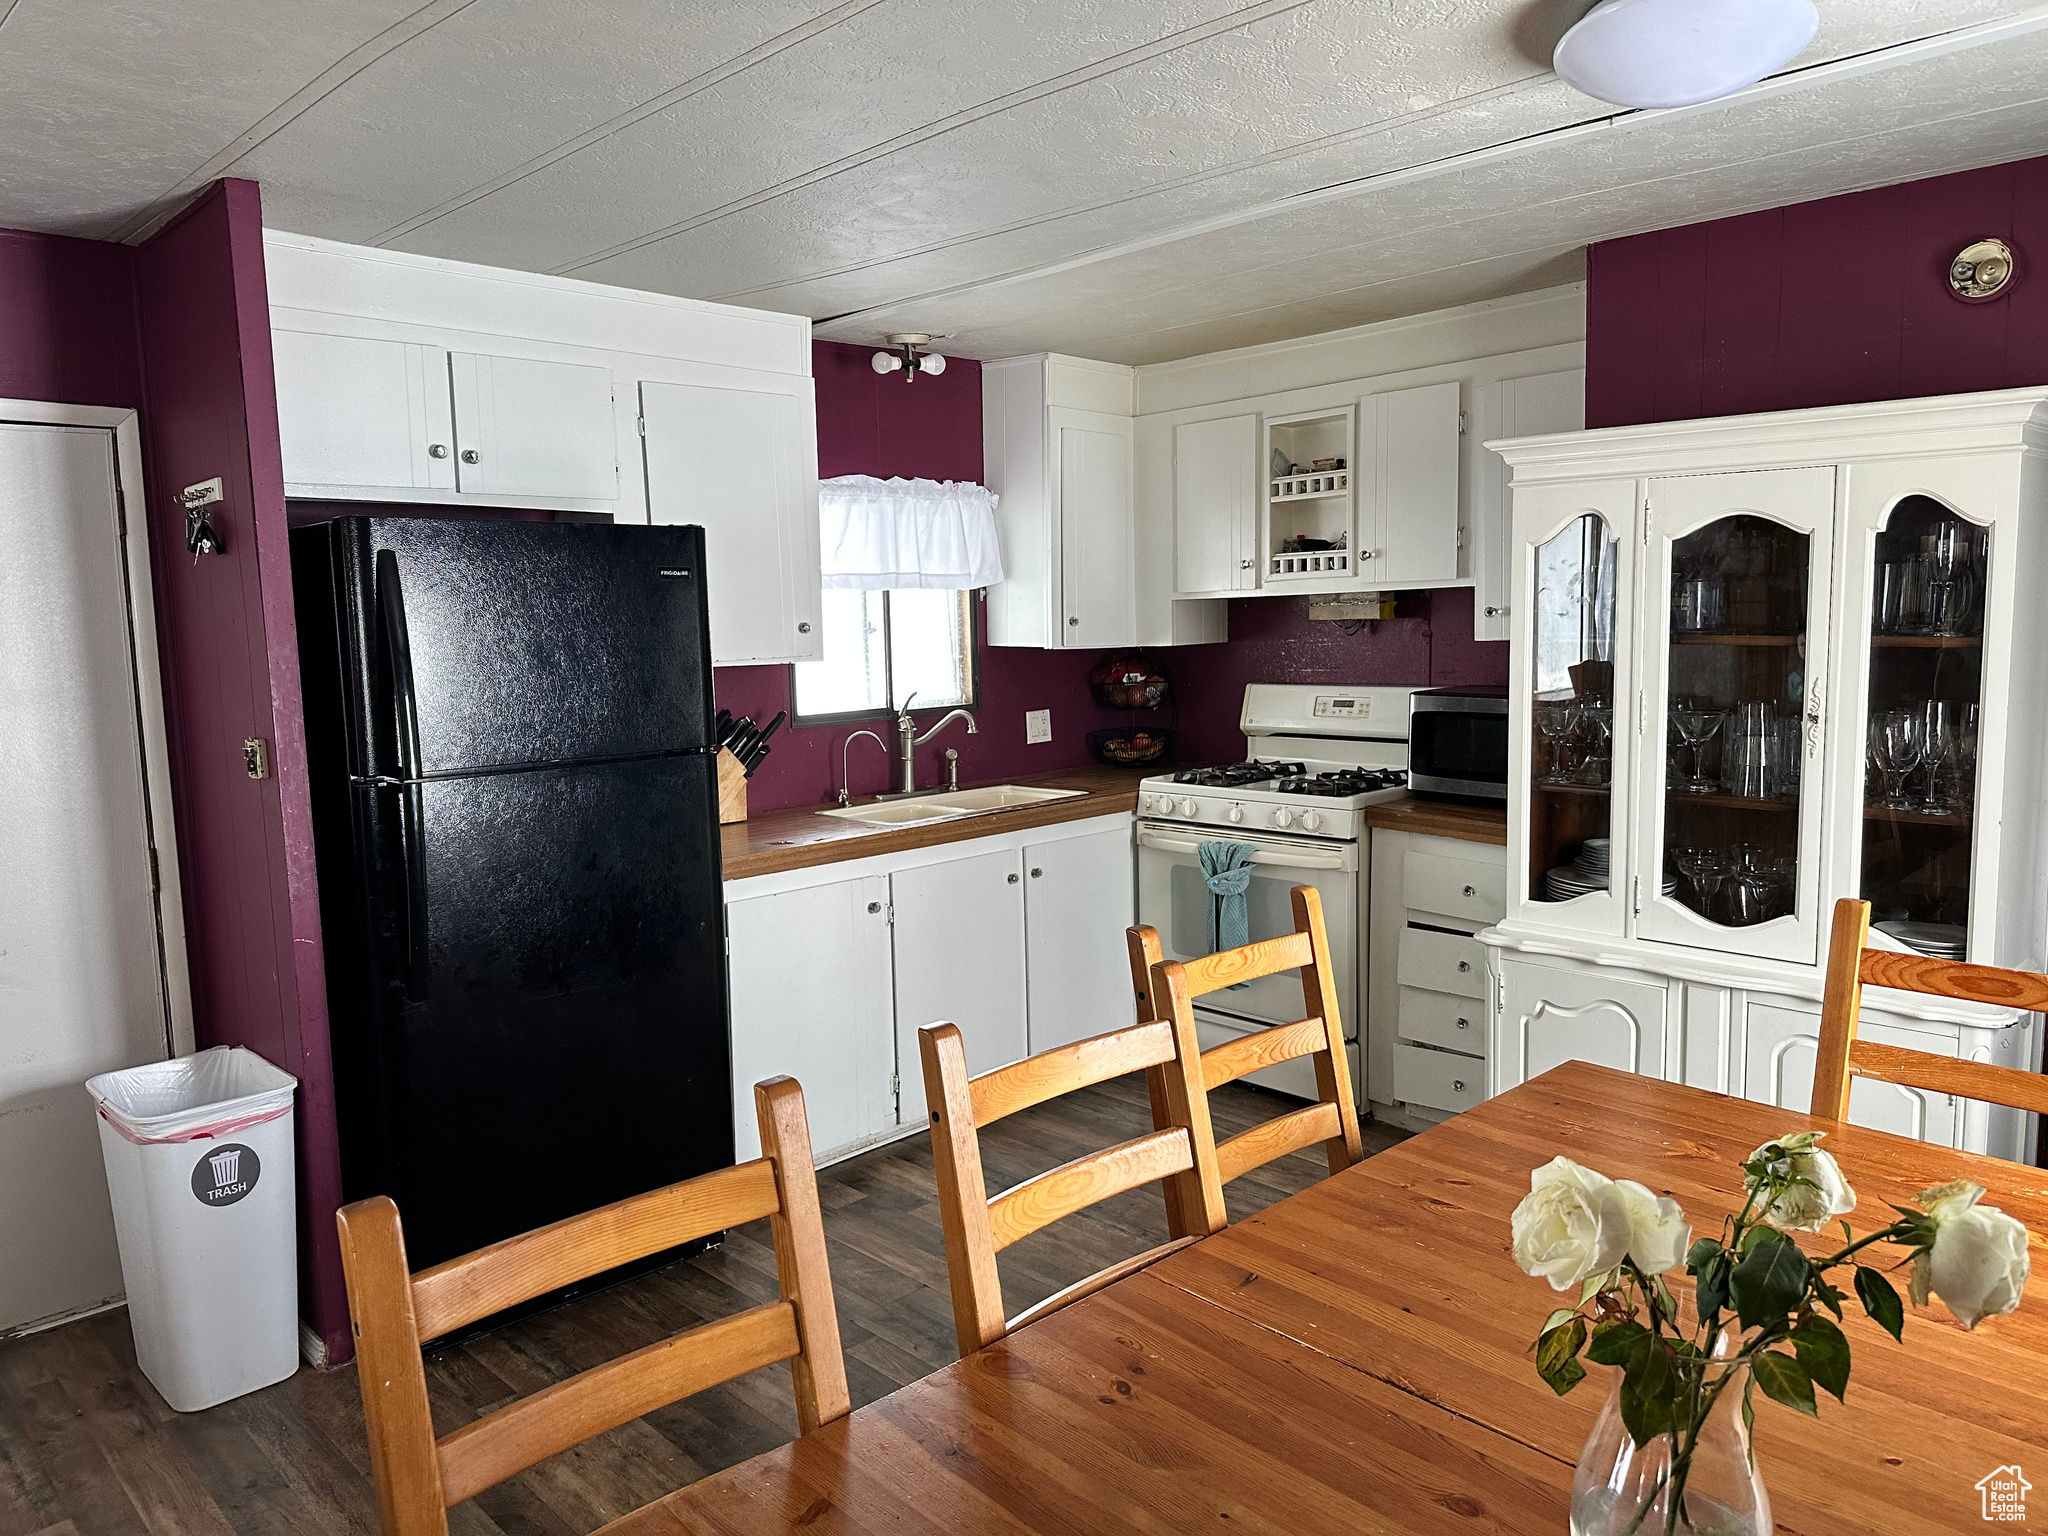 Kitchen with sink, white gas range, black refrigerator, and white cabinets